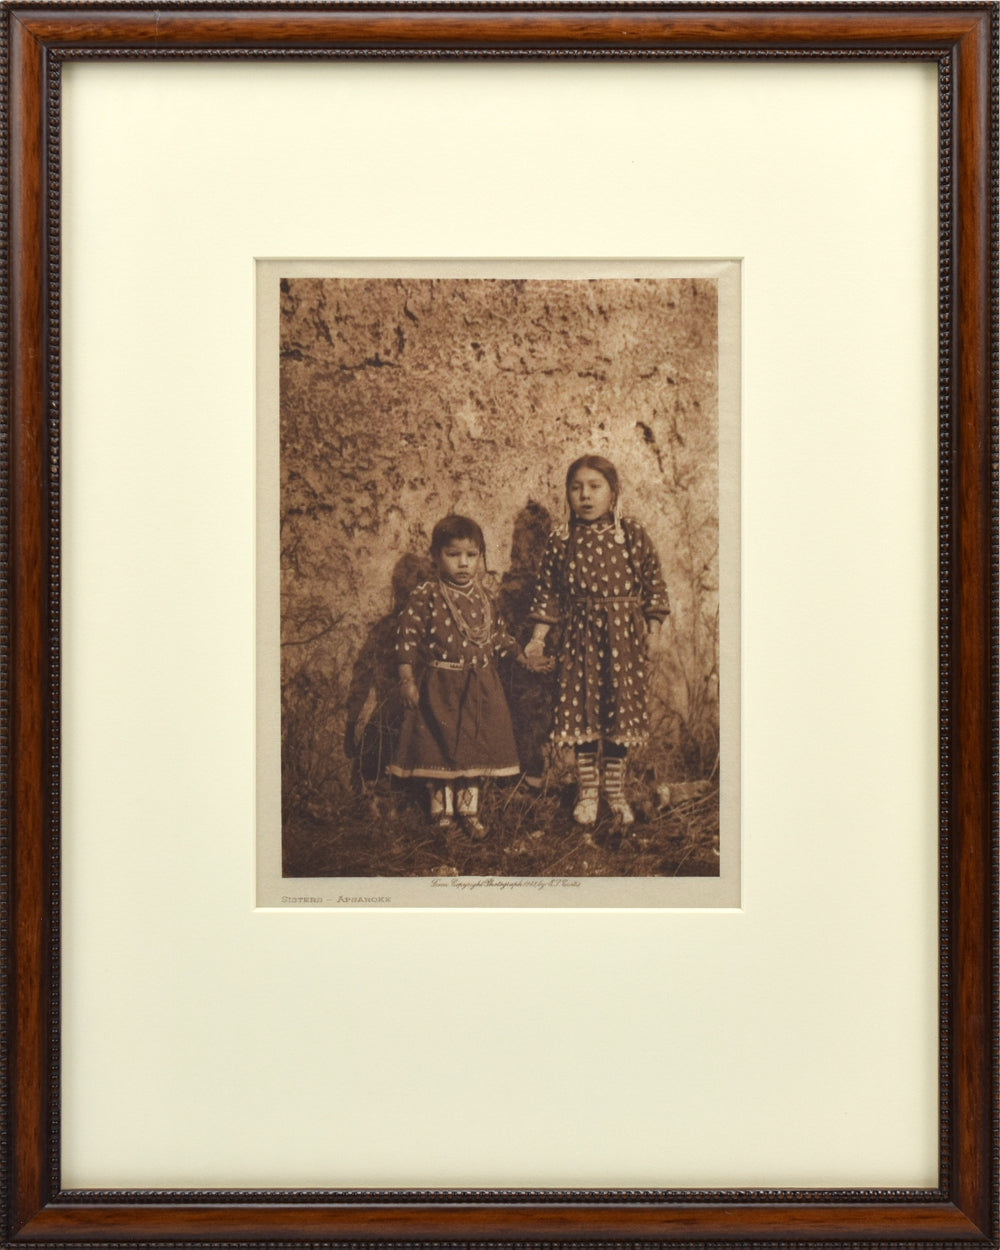 SOLD Edward S. Curtis (1868-1952) - Sisters